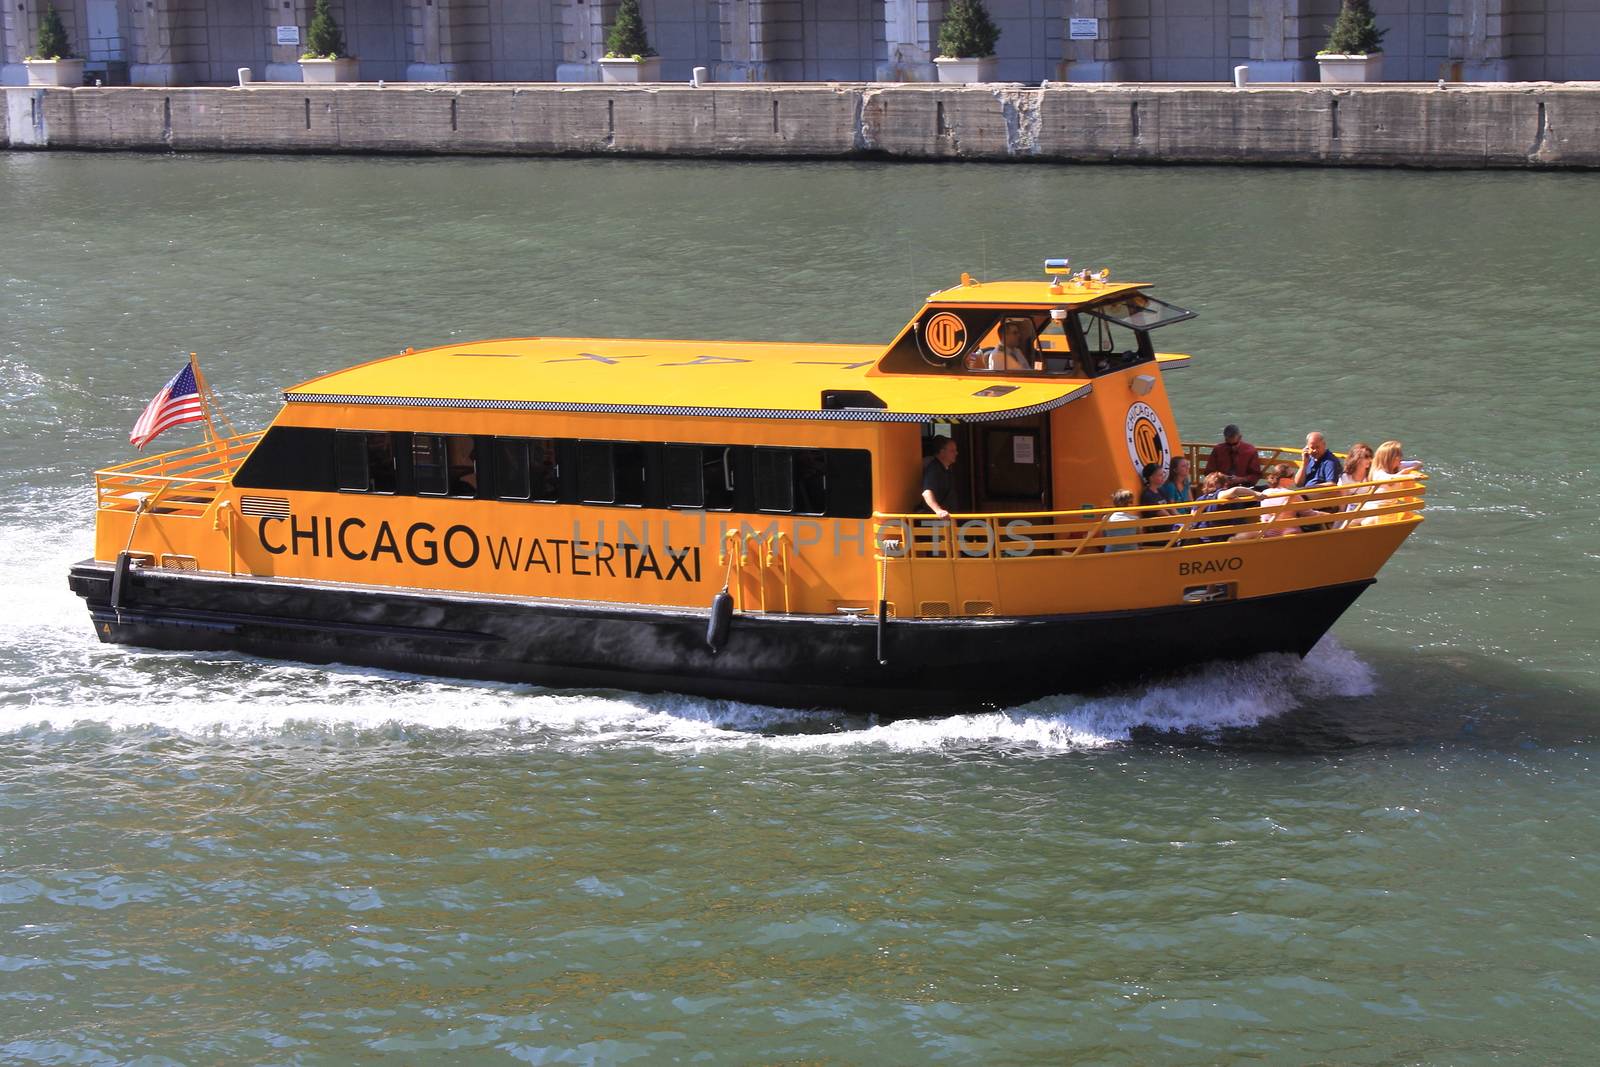 Chicago Water Taxi with passengers on Chicago River.